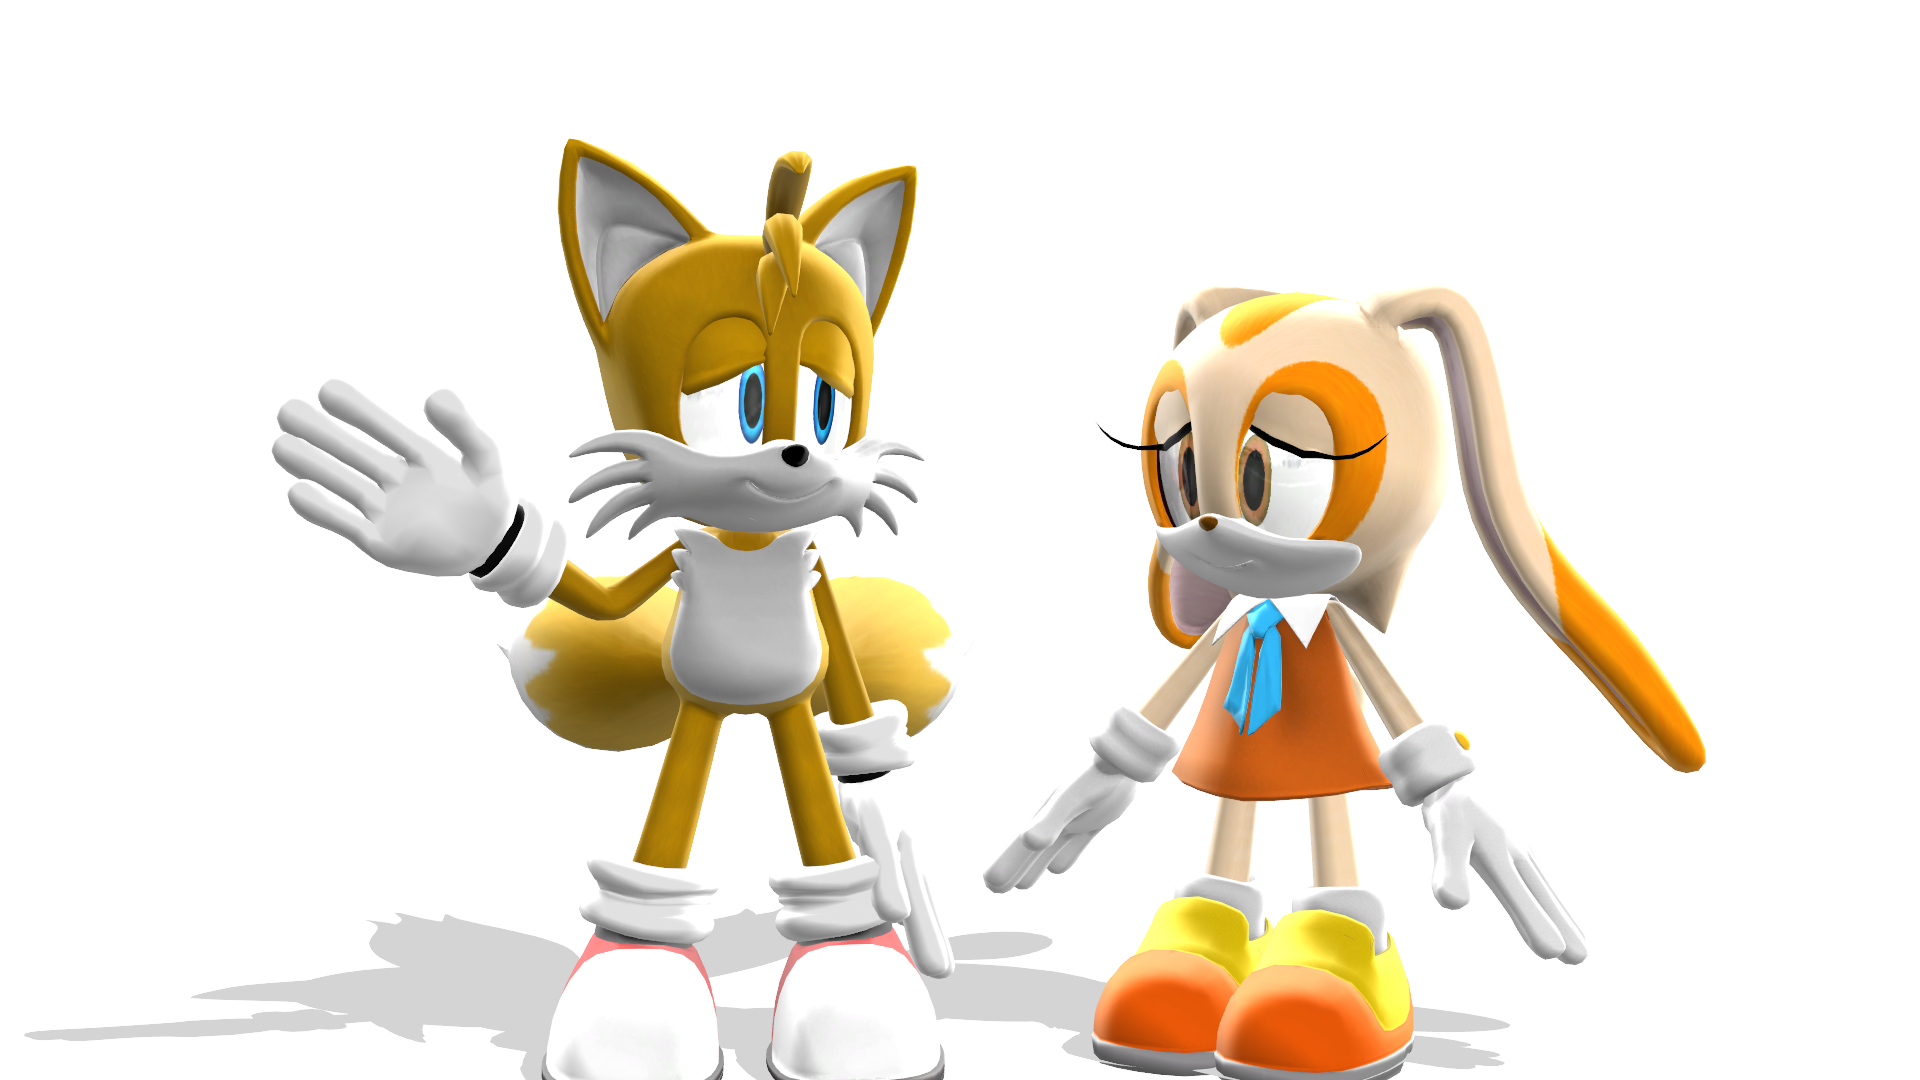 Angry Super Tails by S213413 on DeviantArt